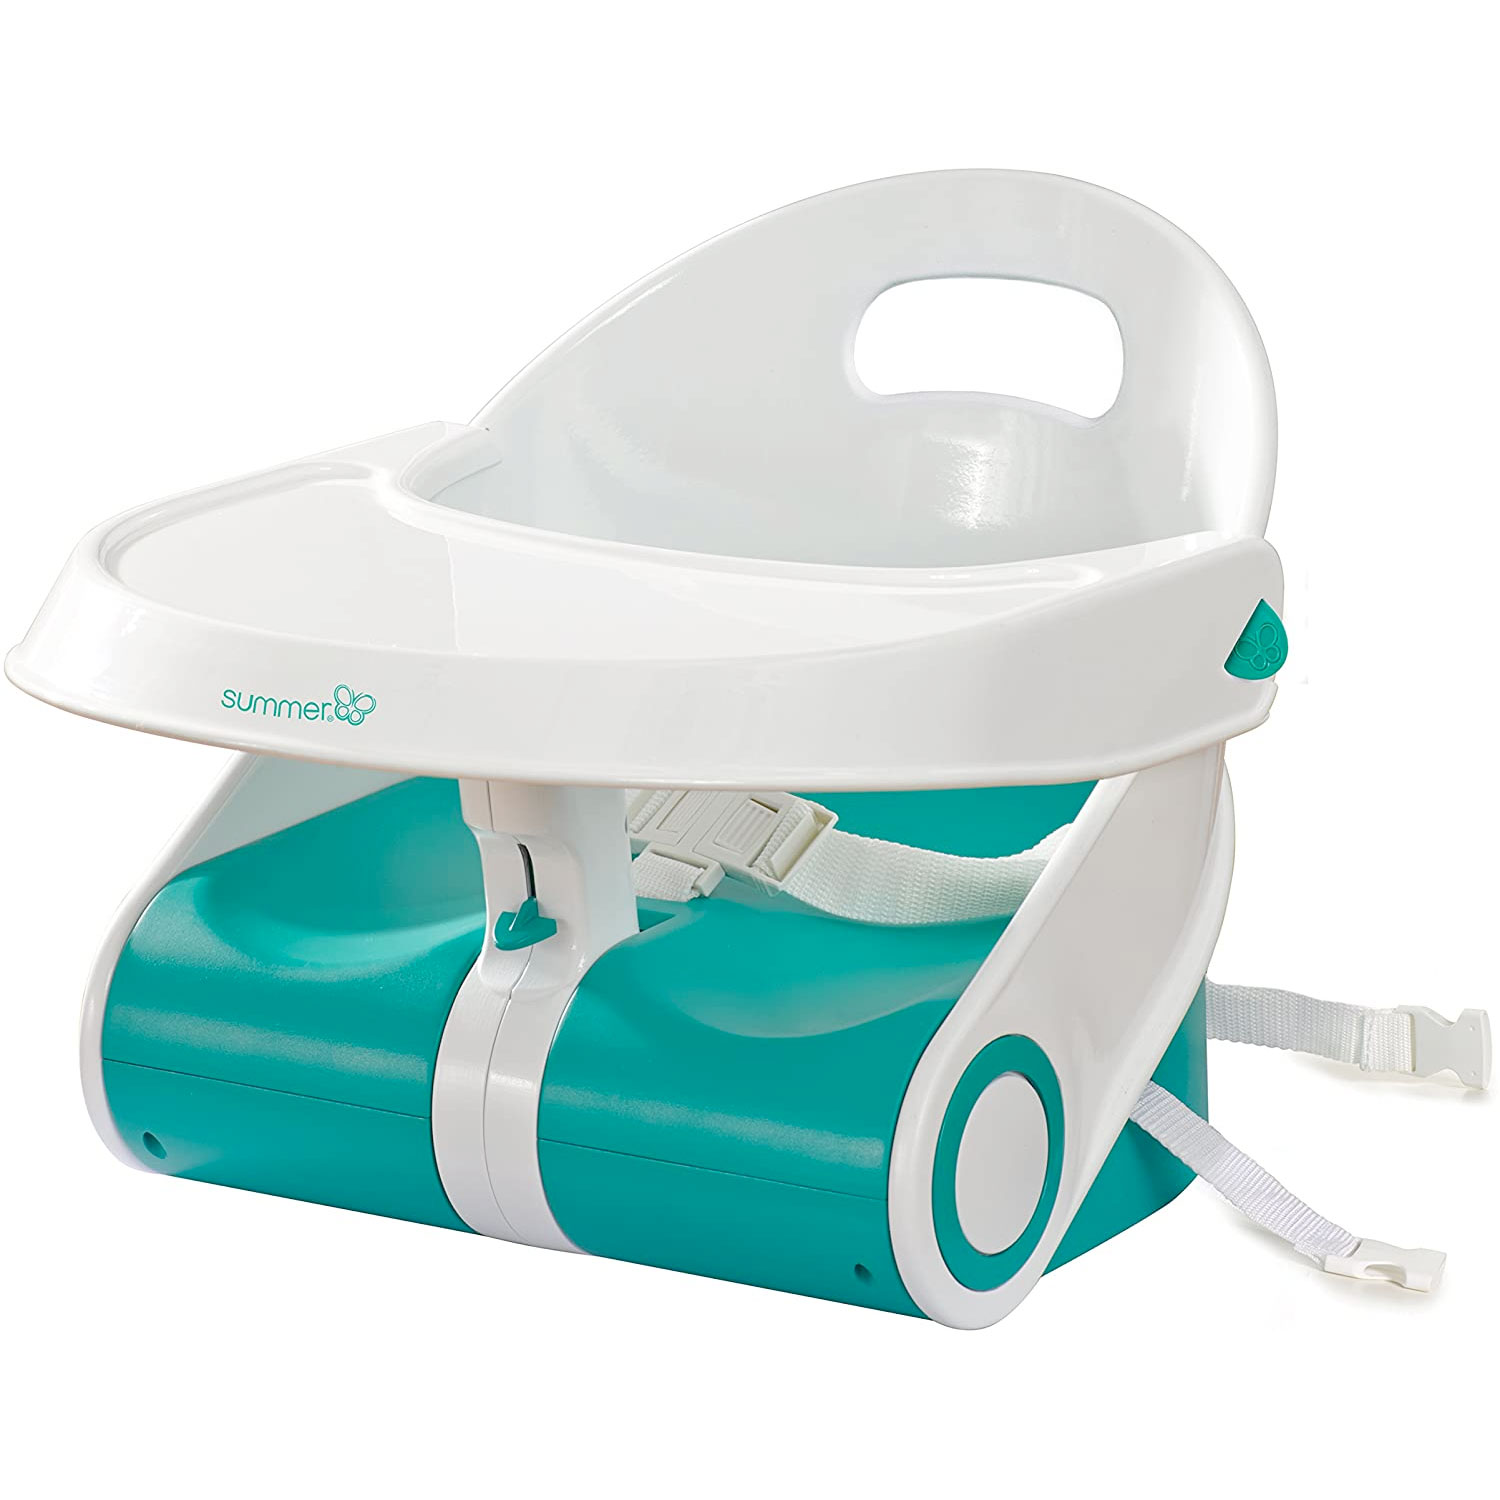 Amazon：Summer Infant Sit ‘N Style Booster Seat只卖$24.97